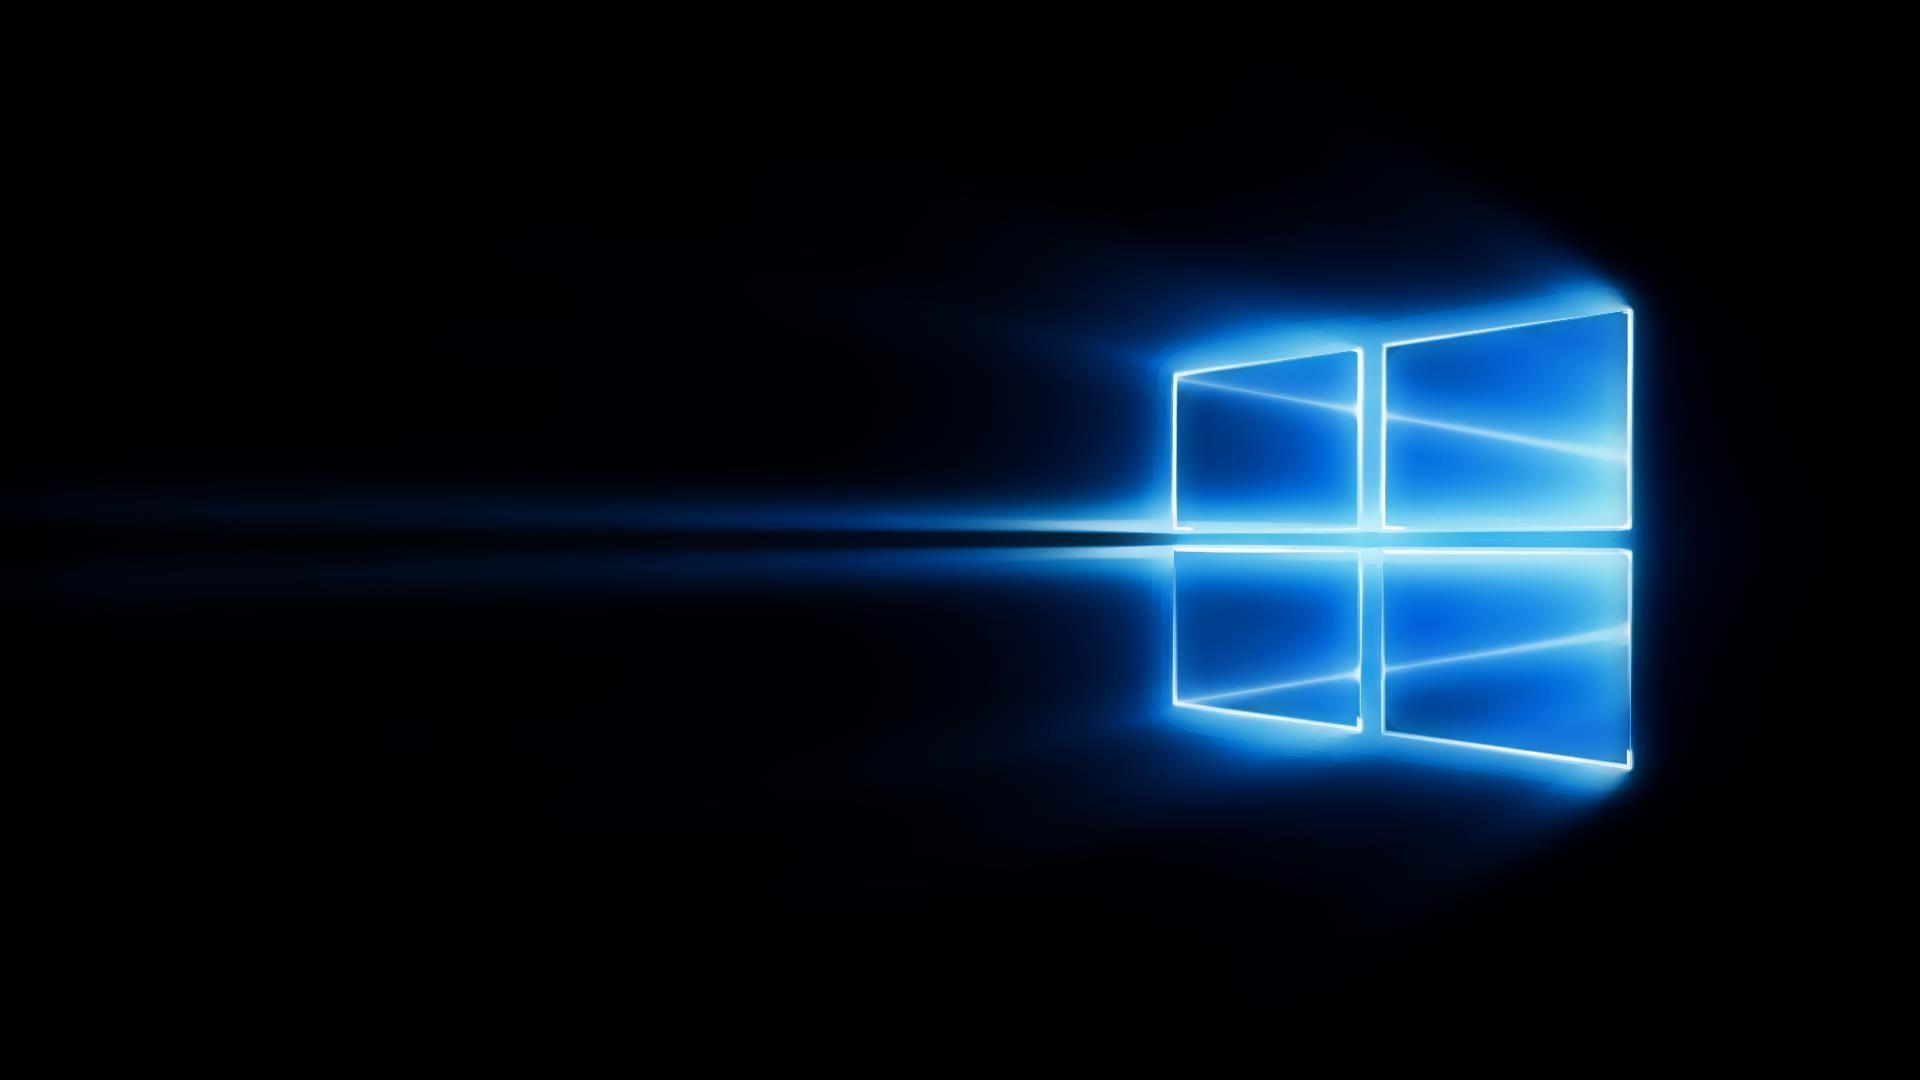 400+ Stunning Windows 10 Wallpapers HD Image Collection